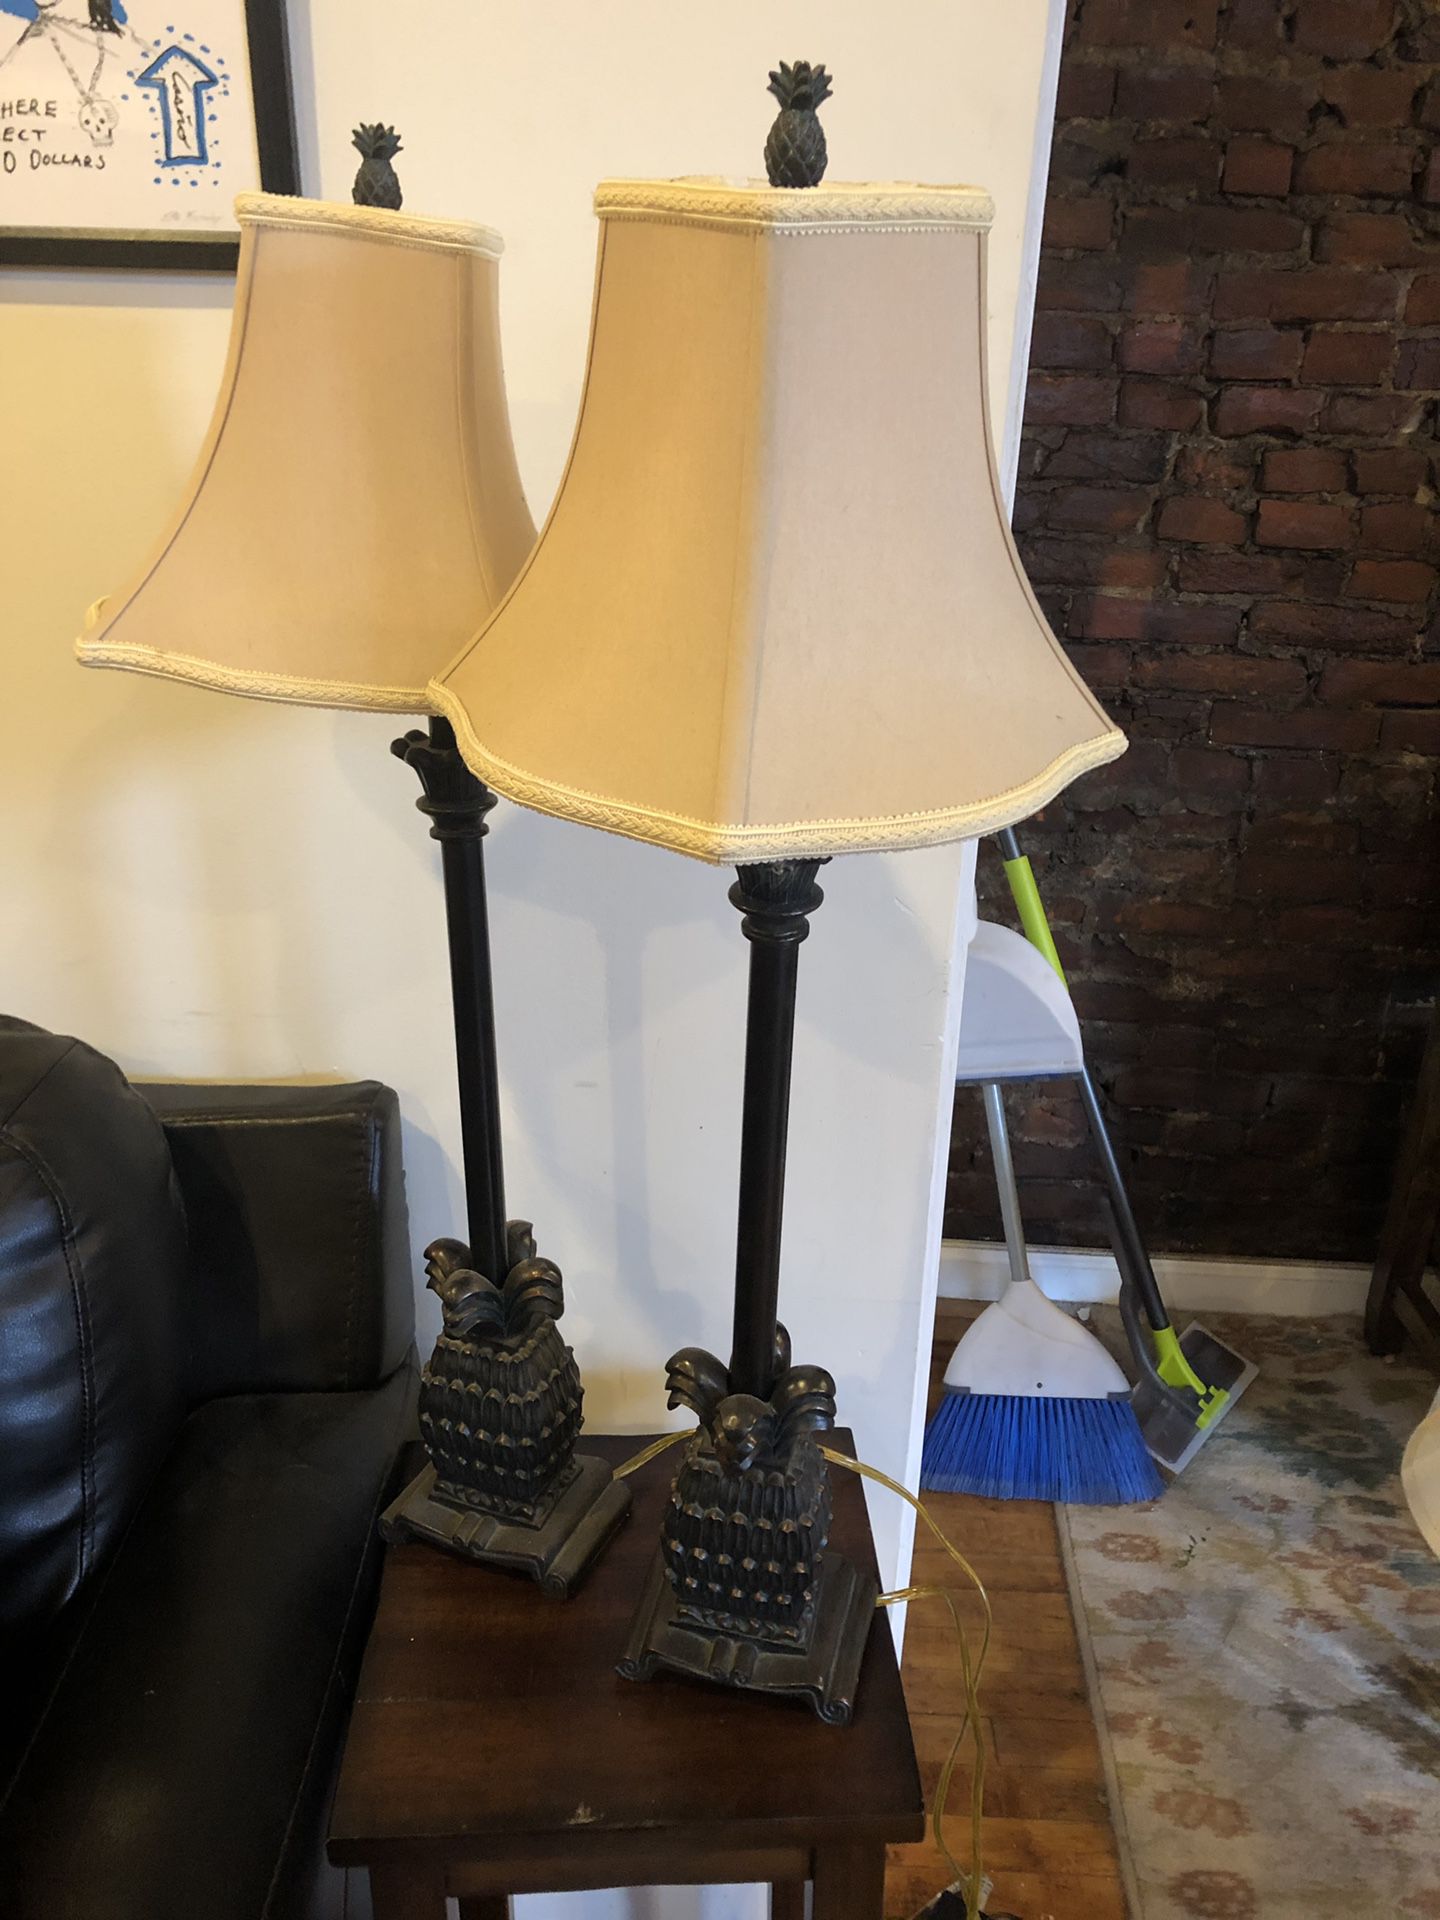 Pair of end table lamps